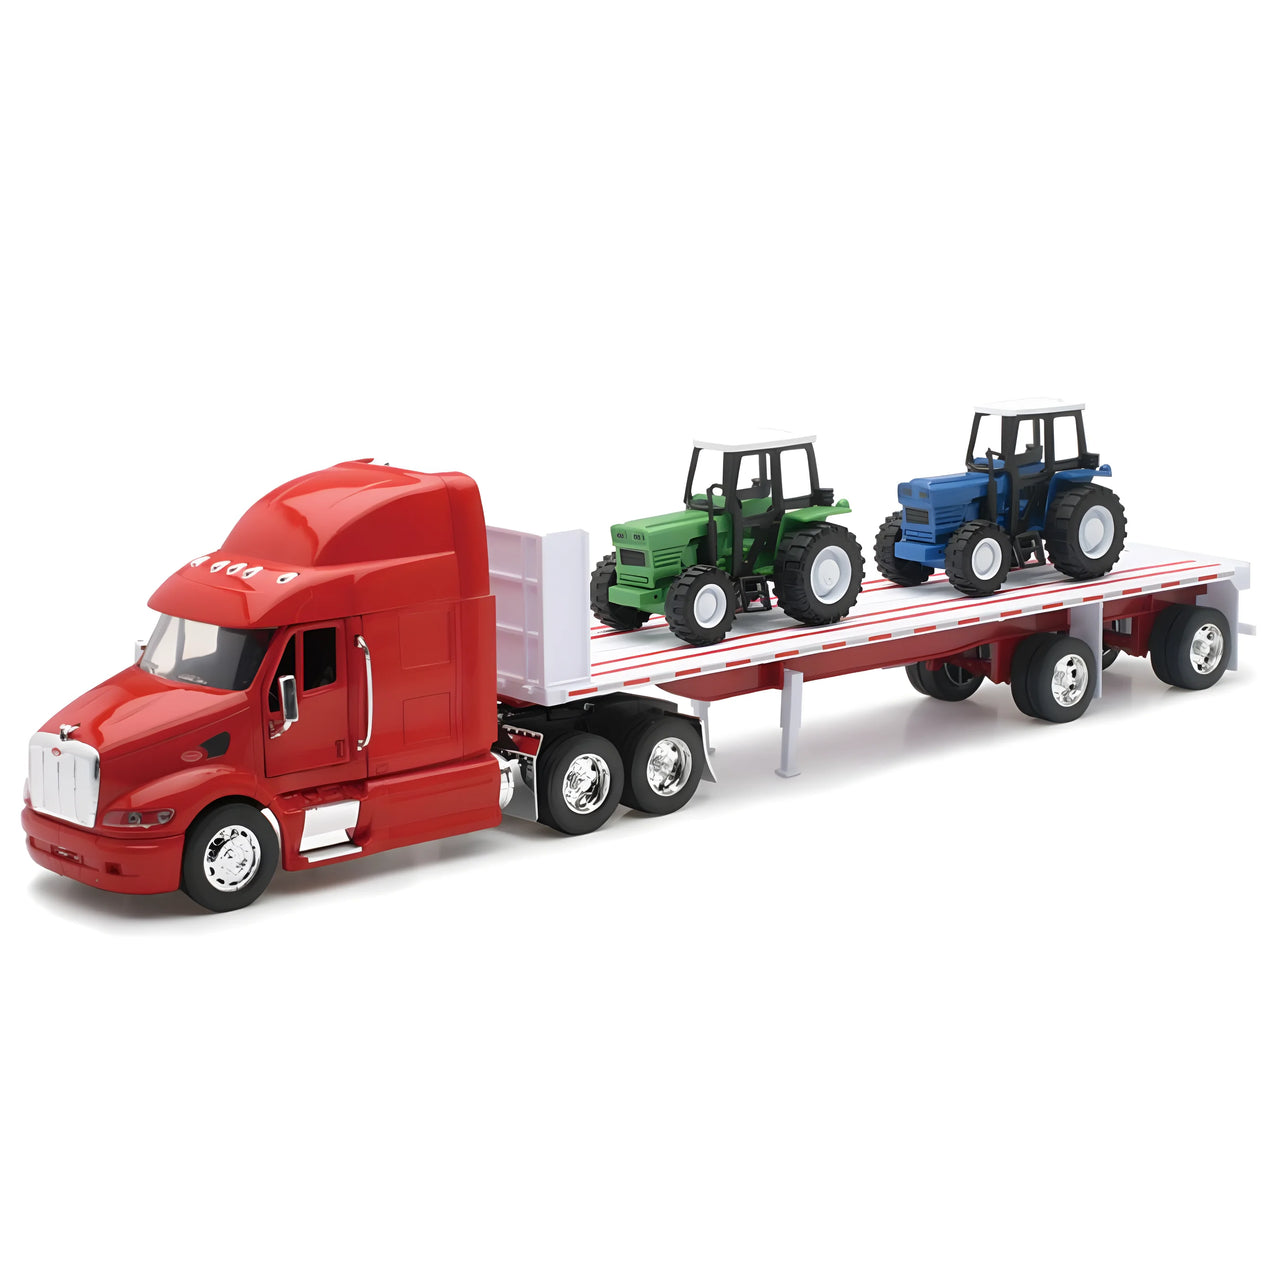 10283A Low Bed Peterbilt 387 Scale 1:32